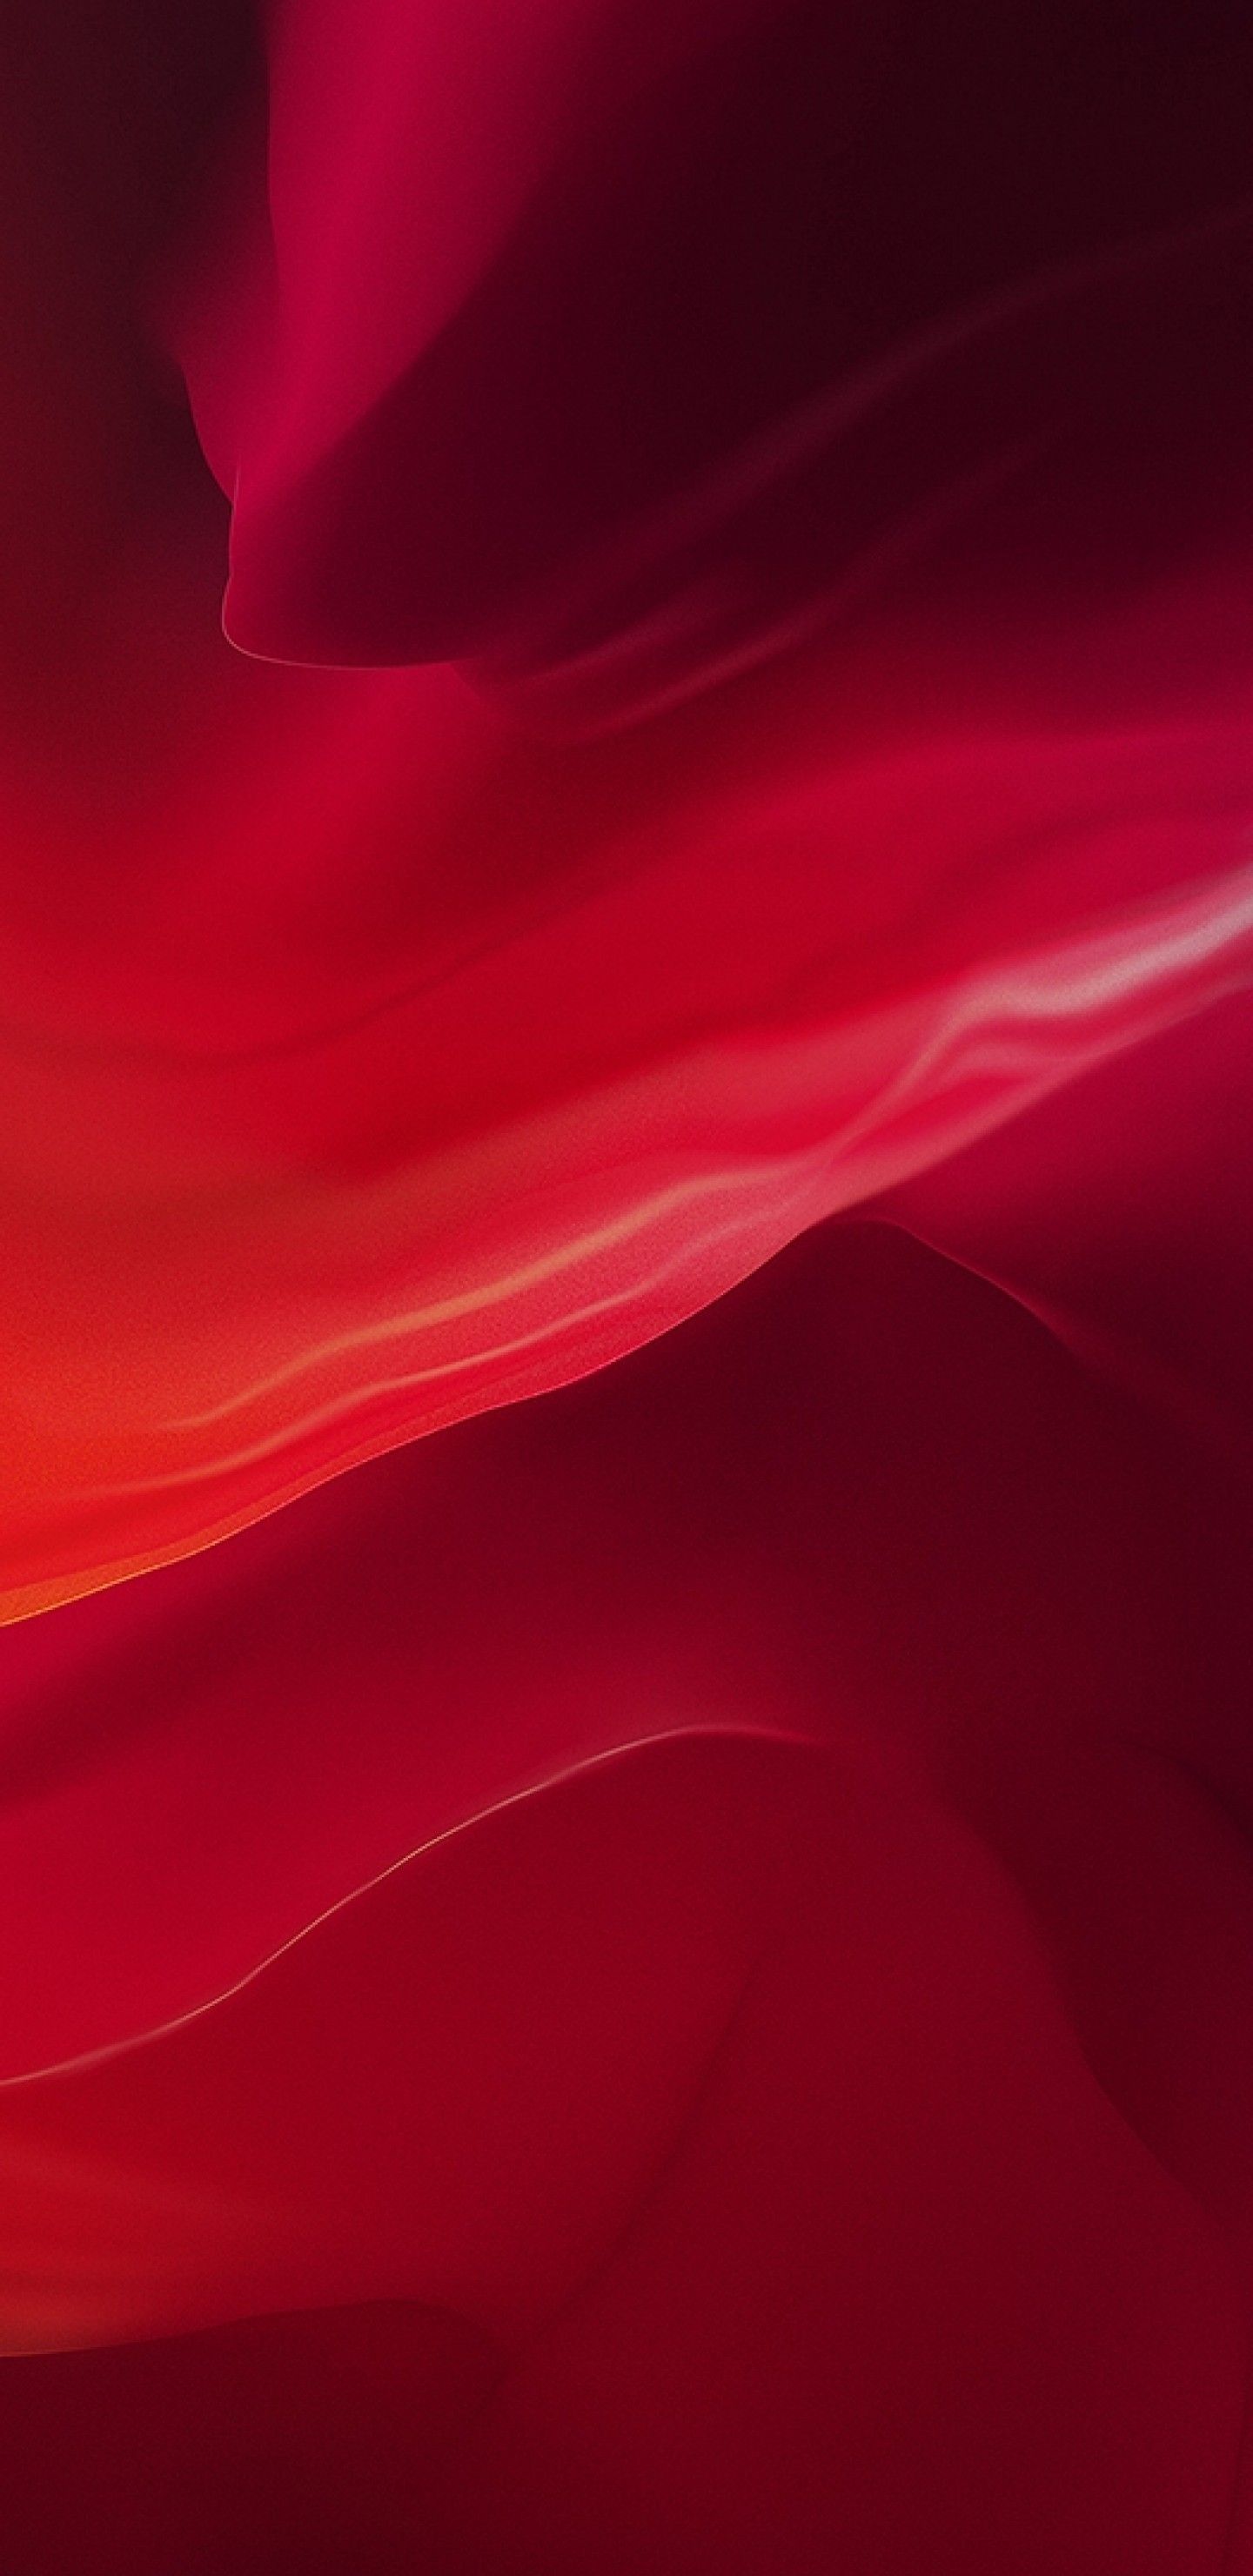 Download 1440x2960 Red Waves, Oneplus 6 Oxygenos Wallpaper